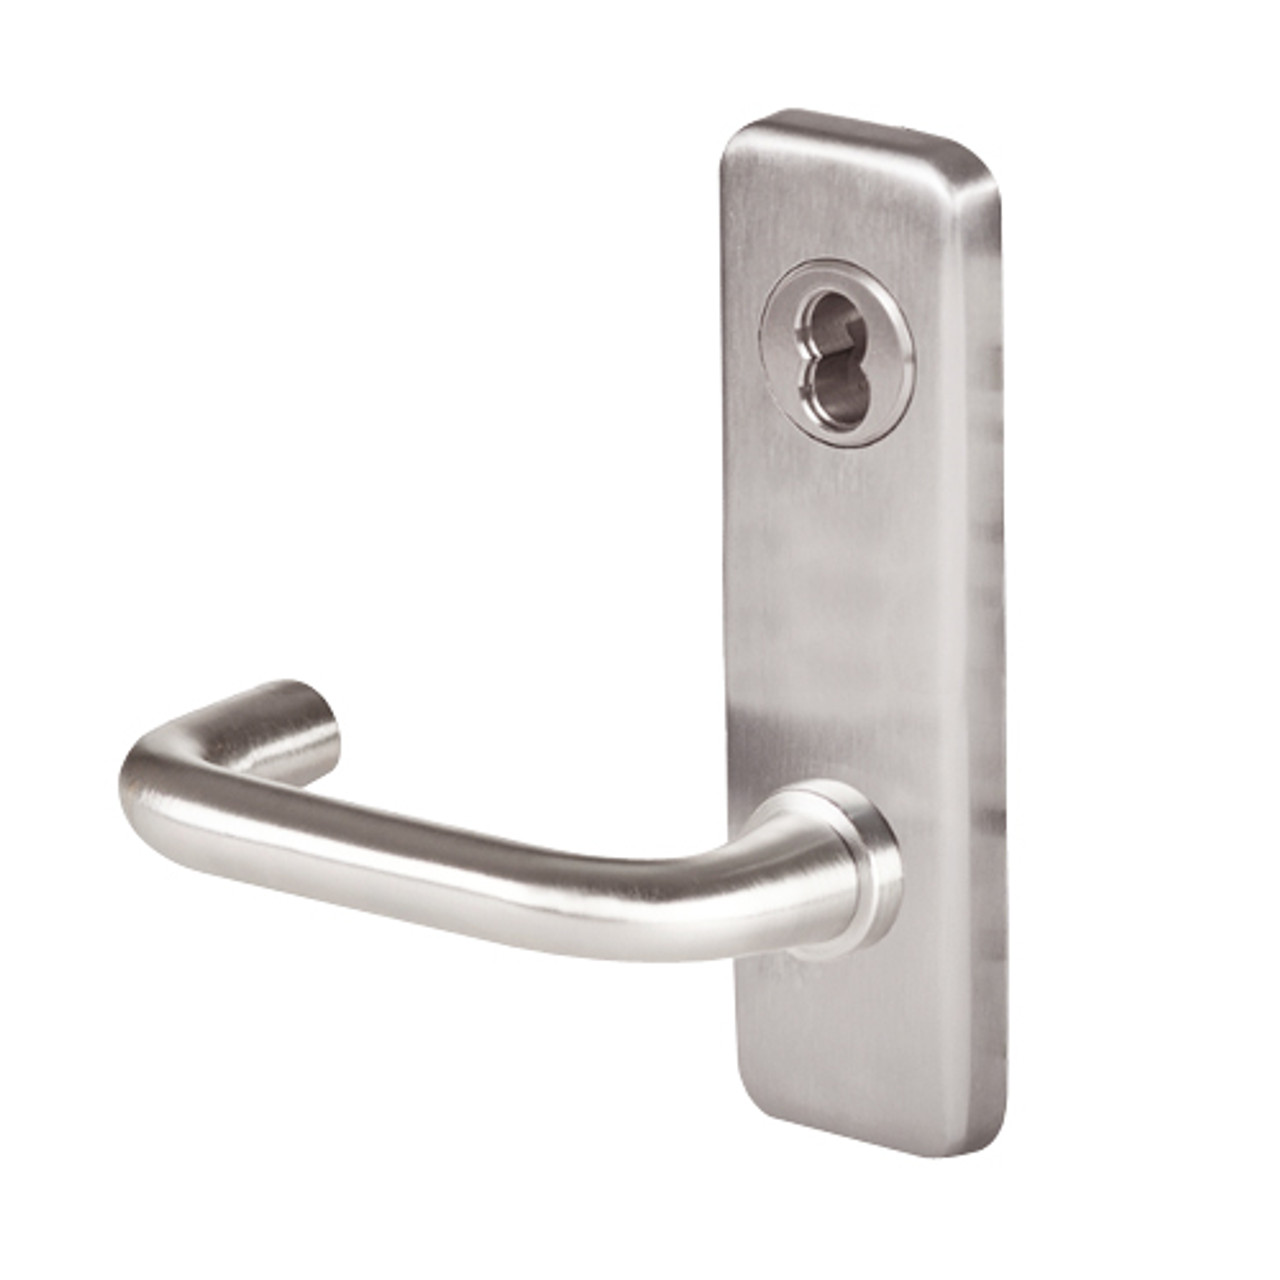 45H0L3J629 Best 40H Series Privacy with Deadbolt Heavy Duty Mortise Lever Lock with Solid Tube Return Style in Bright Stainless Steel